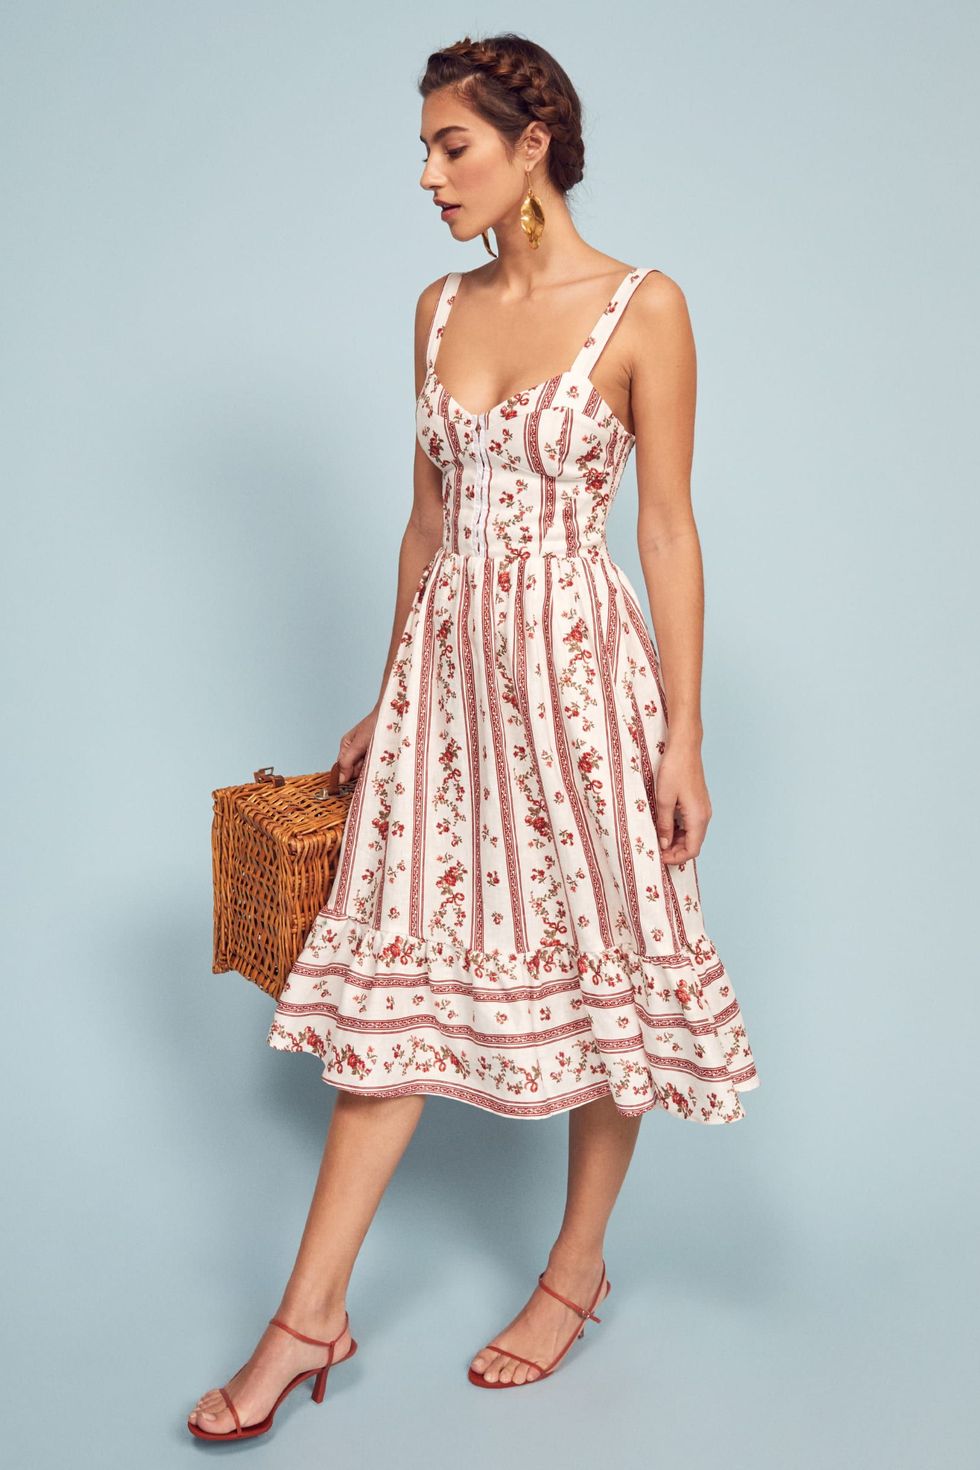 Shop the Look: Dolci Sweetheart Dress 